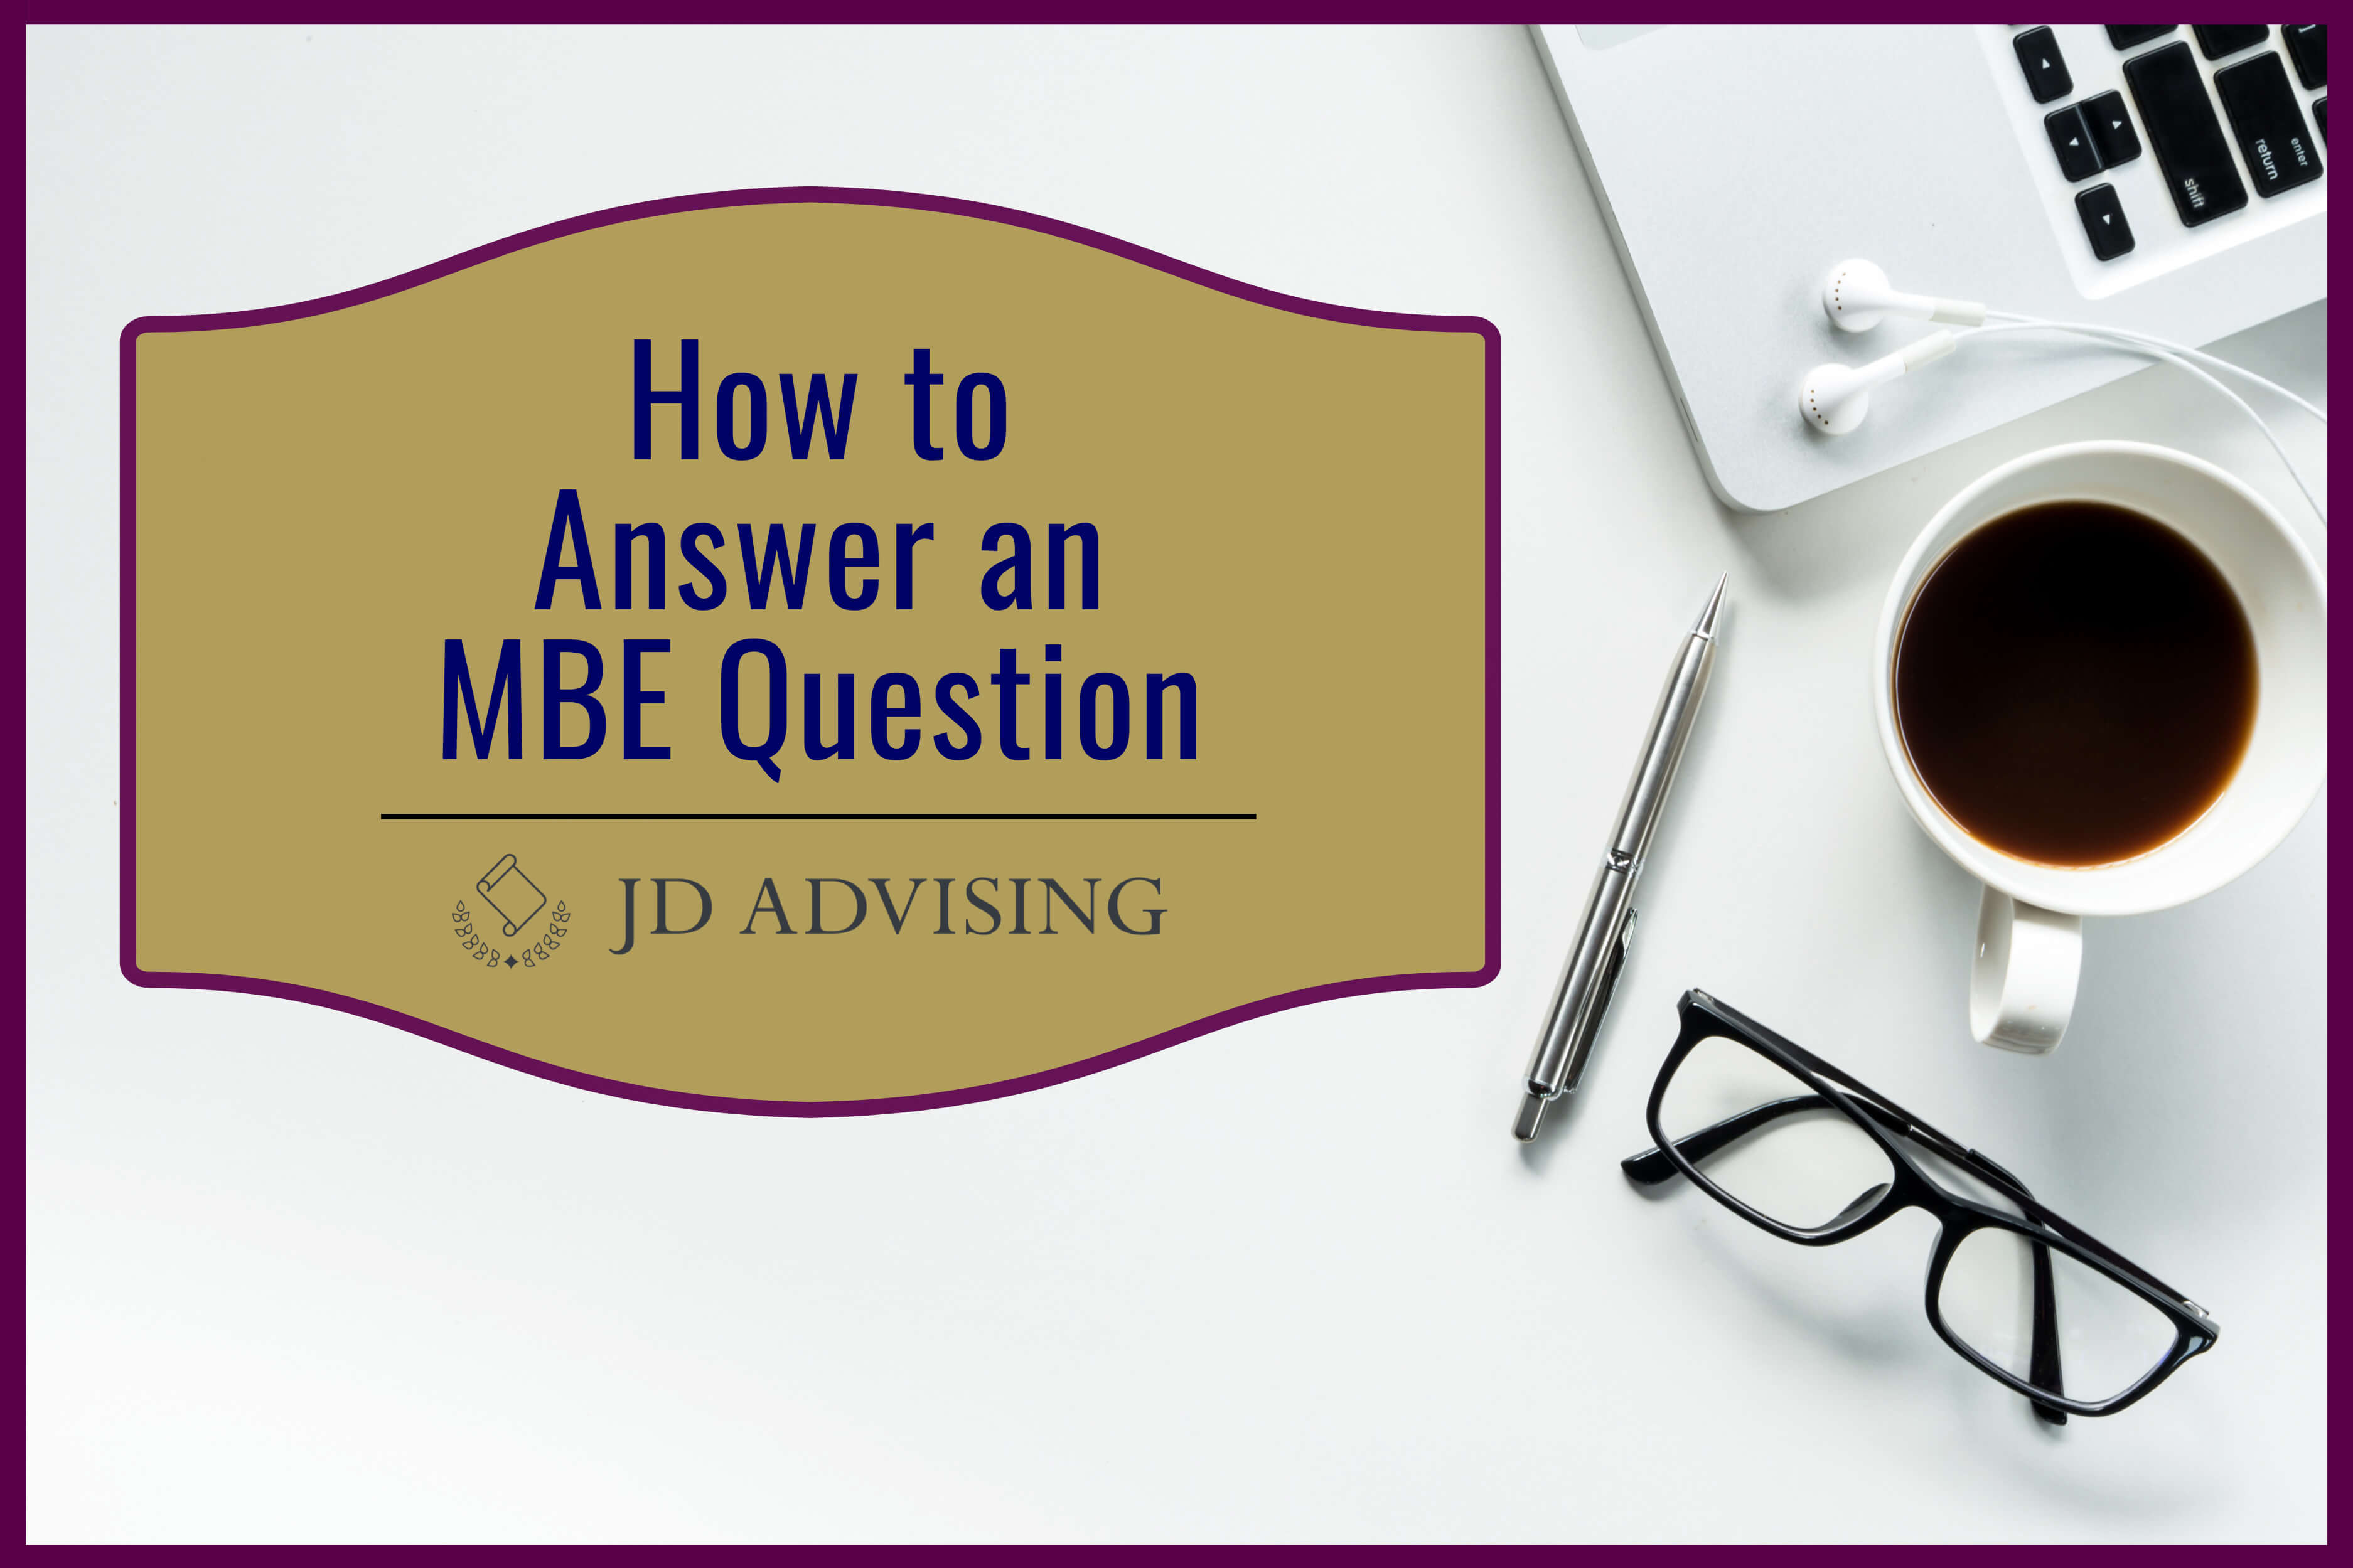 how to answer an MBE question, dissect mbe question, improve mbe score